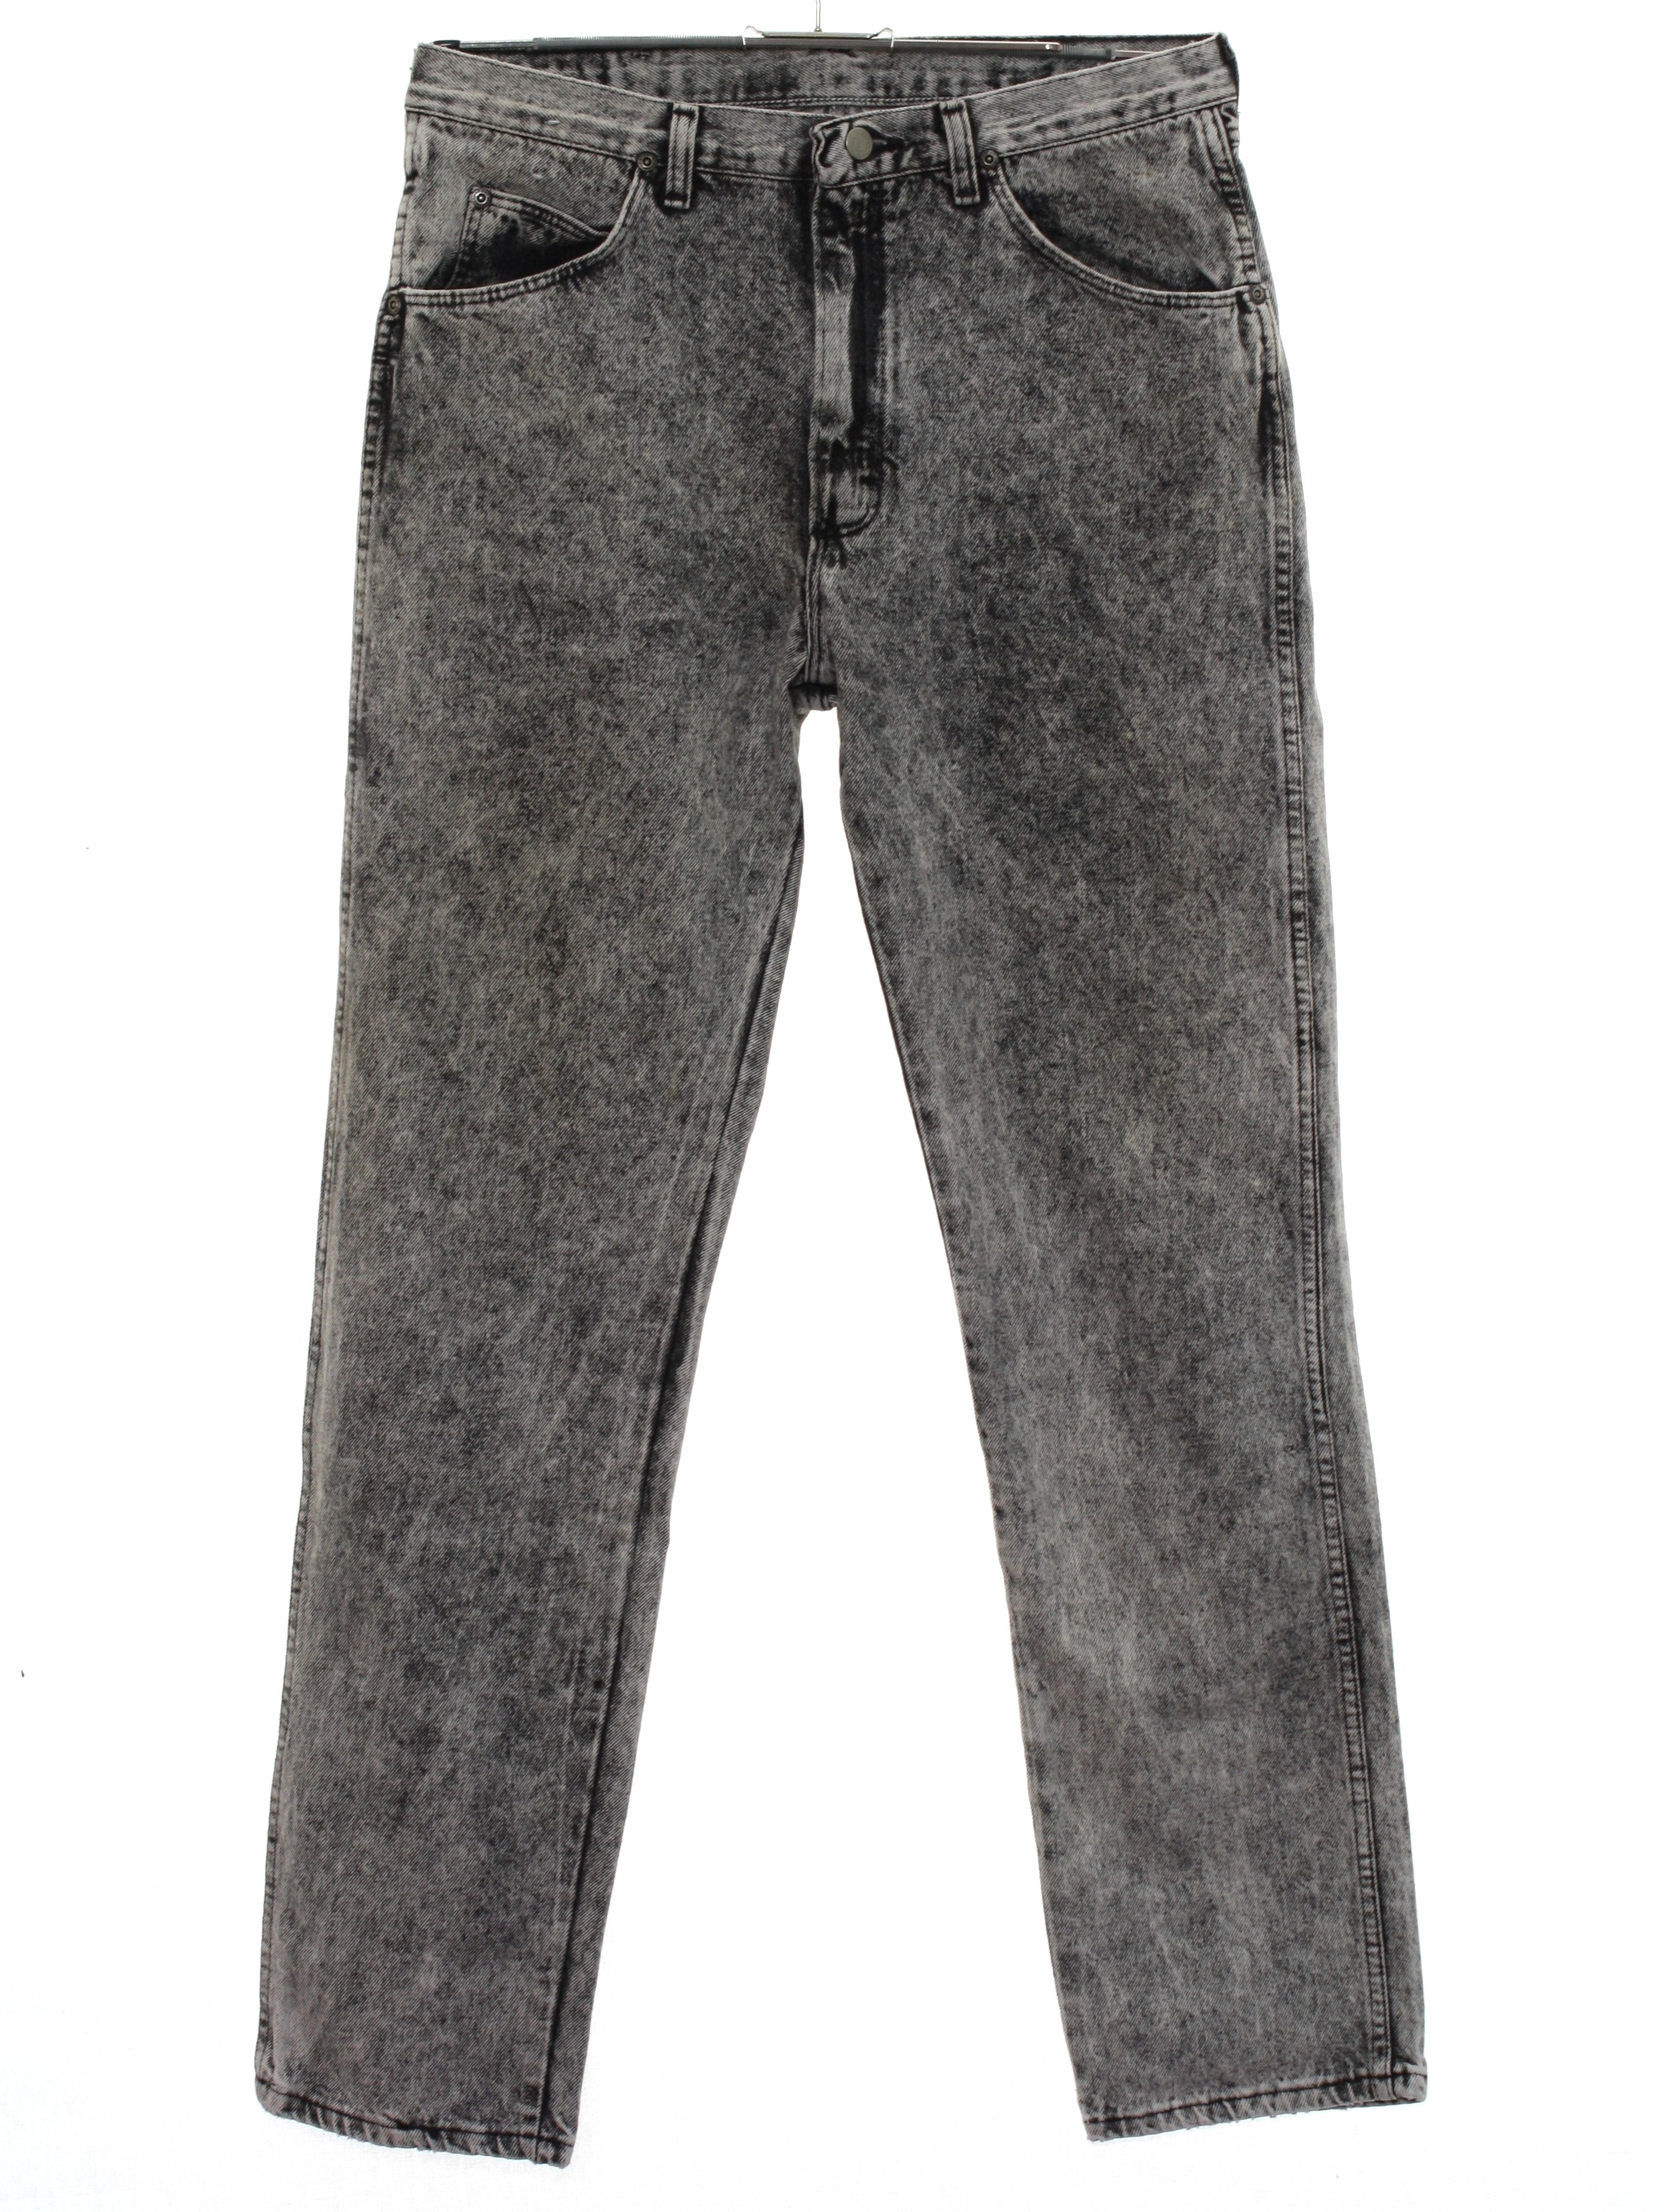 Eighties Pants: Late 80s or early 90s Wrangler- Mens acid washed black ...